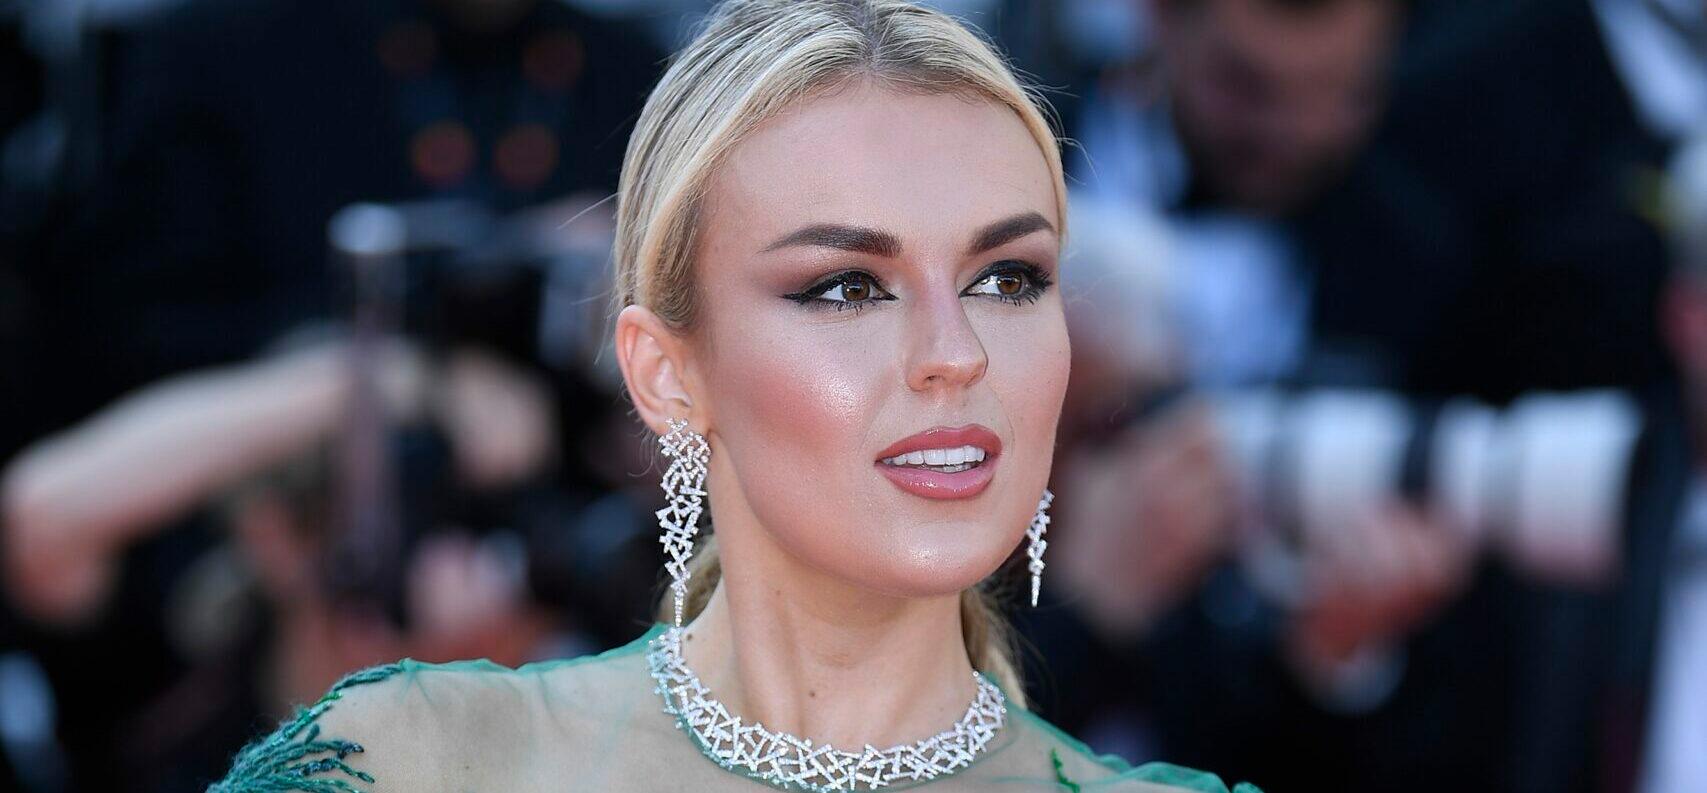 Tallia Storm on the Armageddon Time red carpet at the Cannes Film Festival